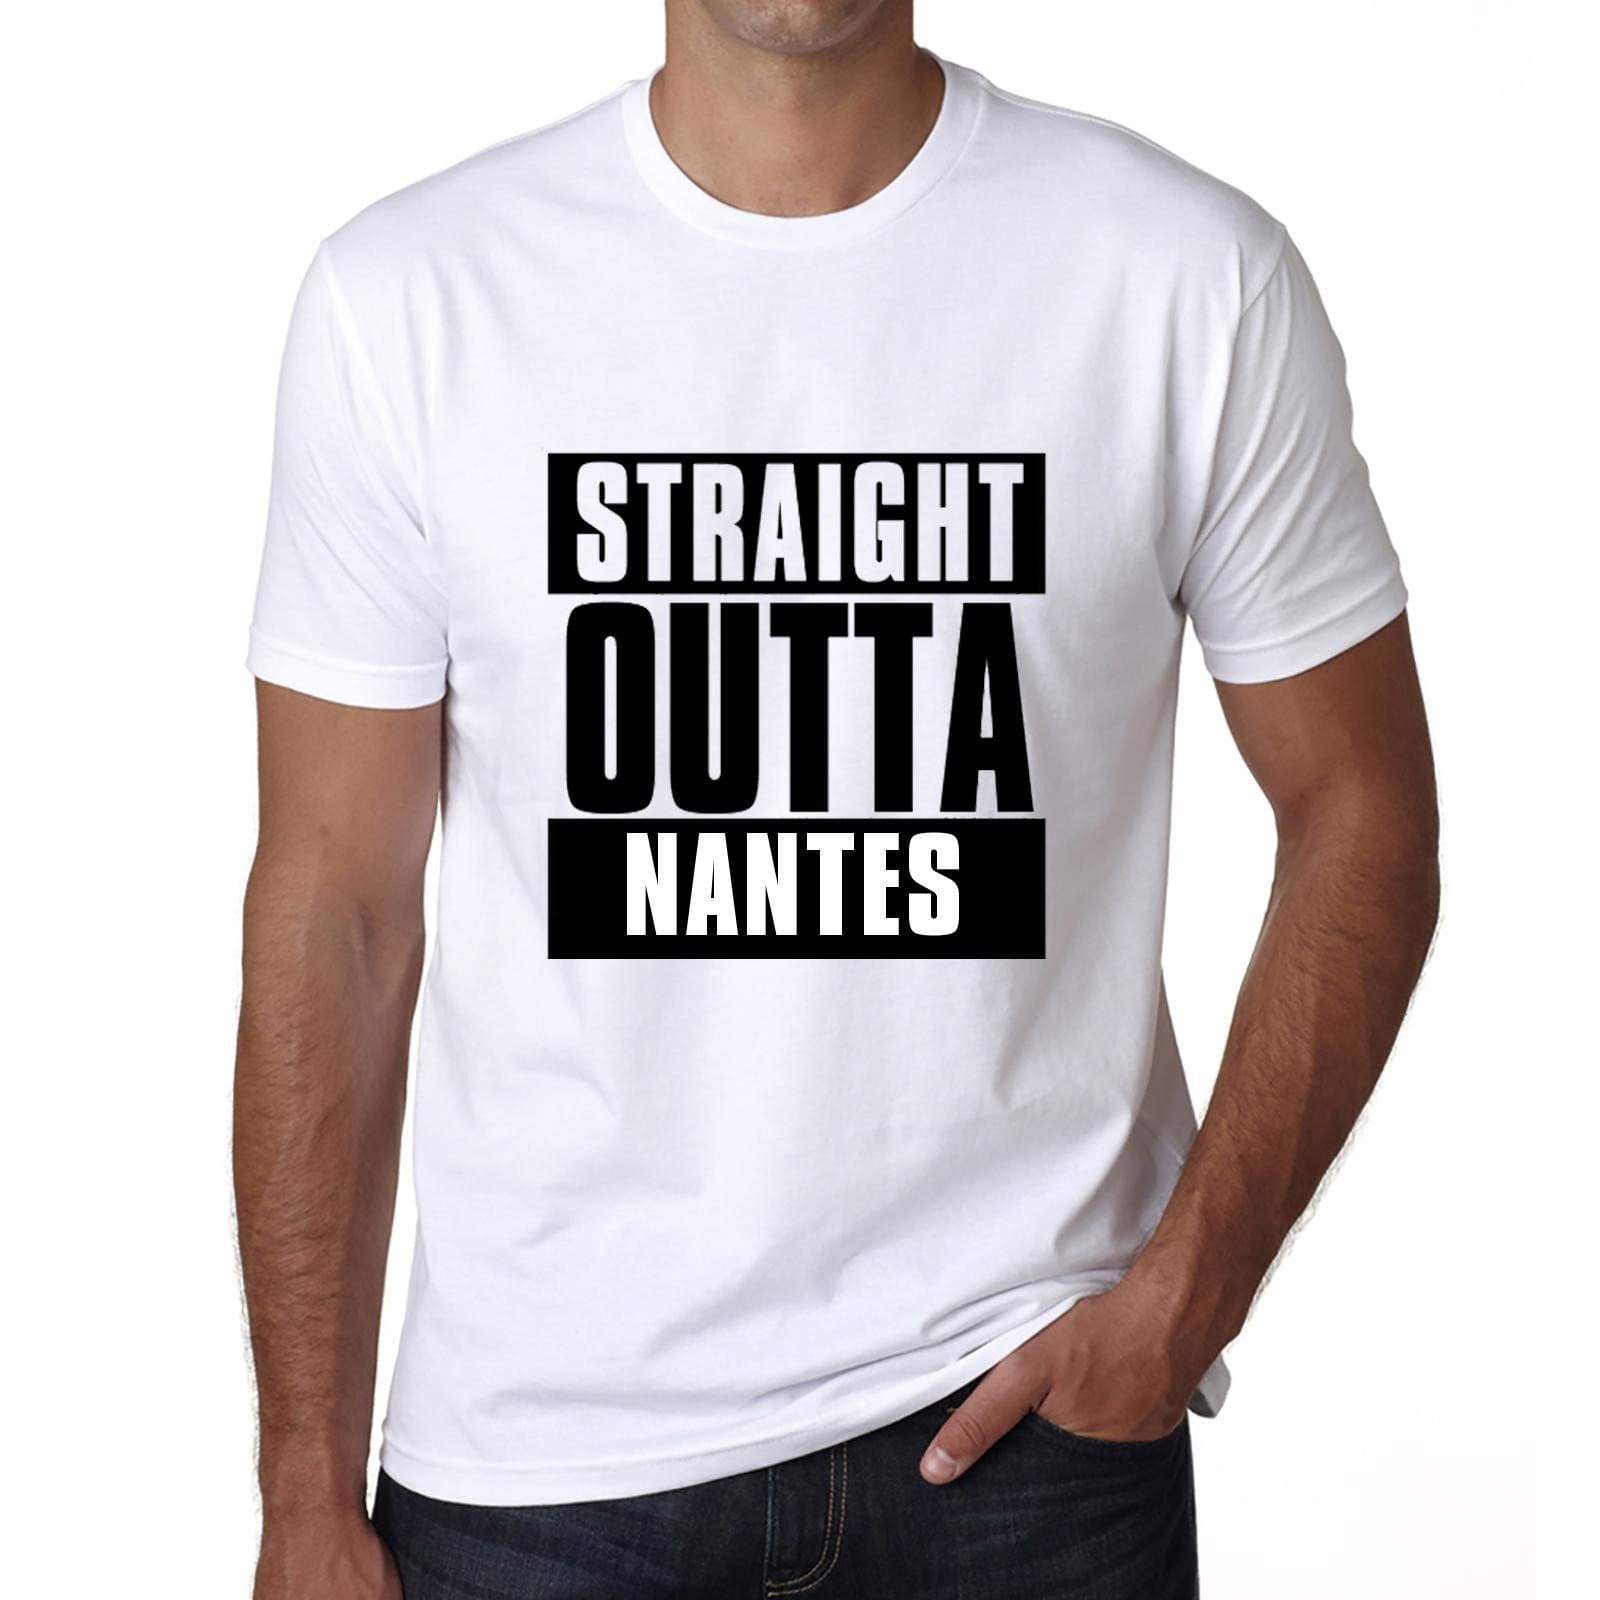 Straight Outta Nantes Mens Short Sleeve Round Neck T-Shirt 00027 - White / S - Casual